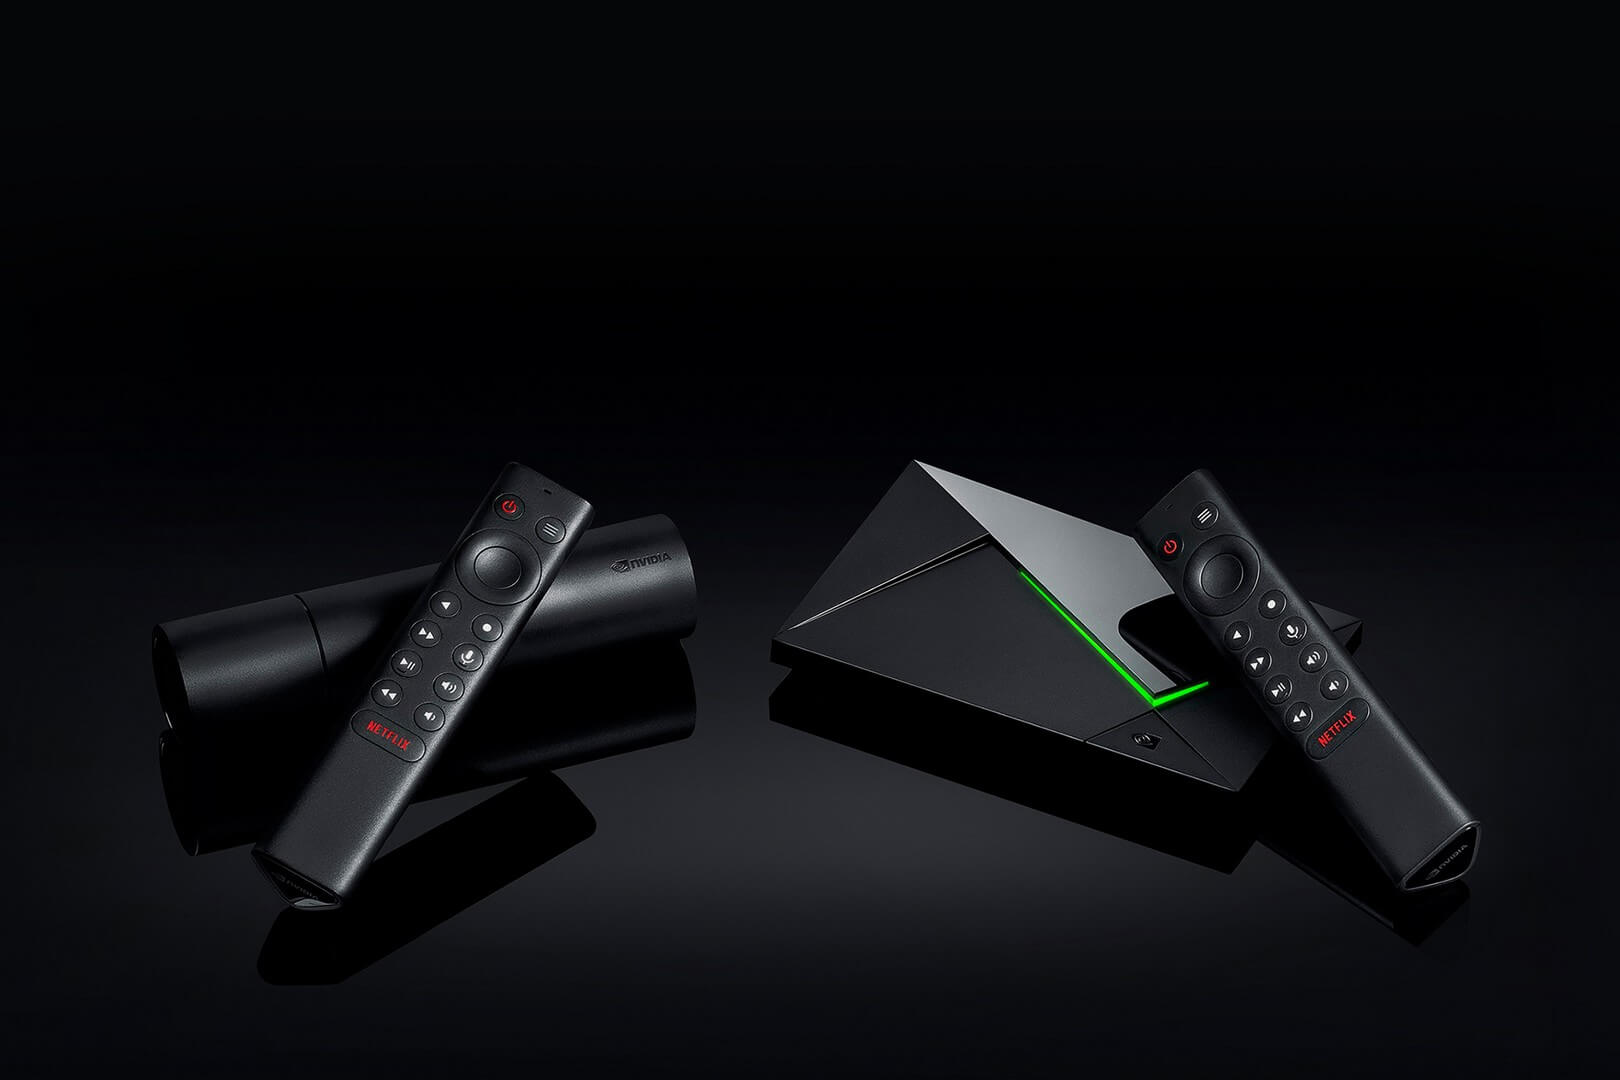 Nvidia launches new Shield TV and Shield TV Pro set-top boxes